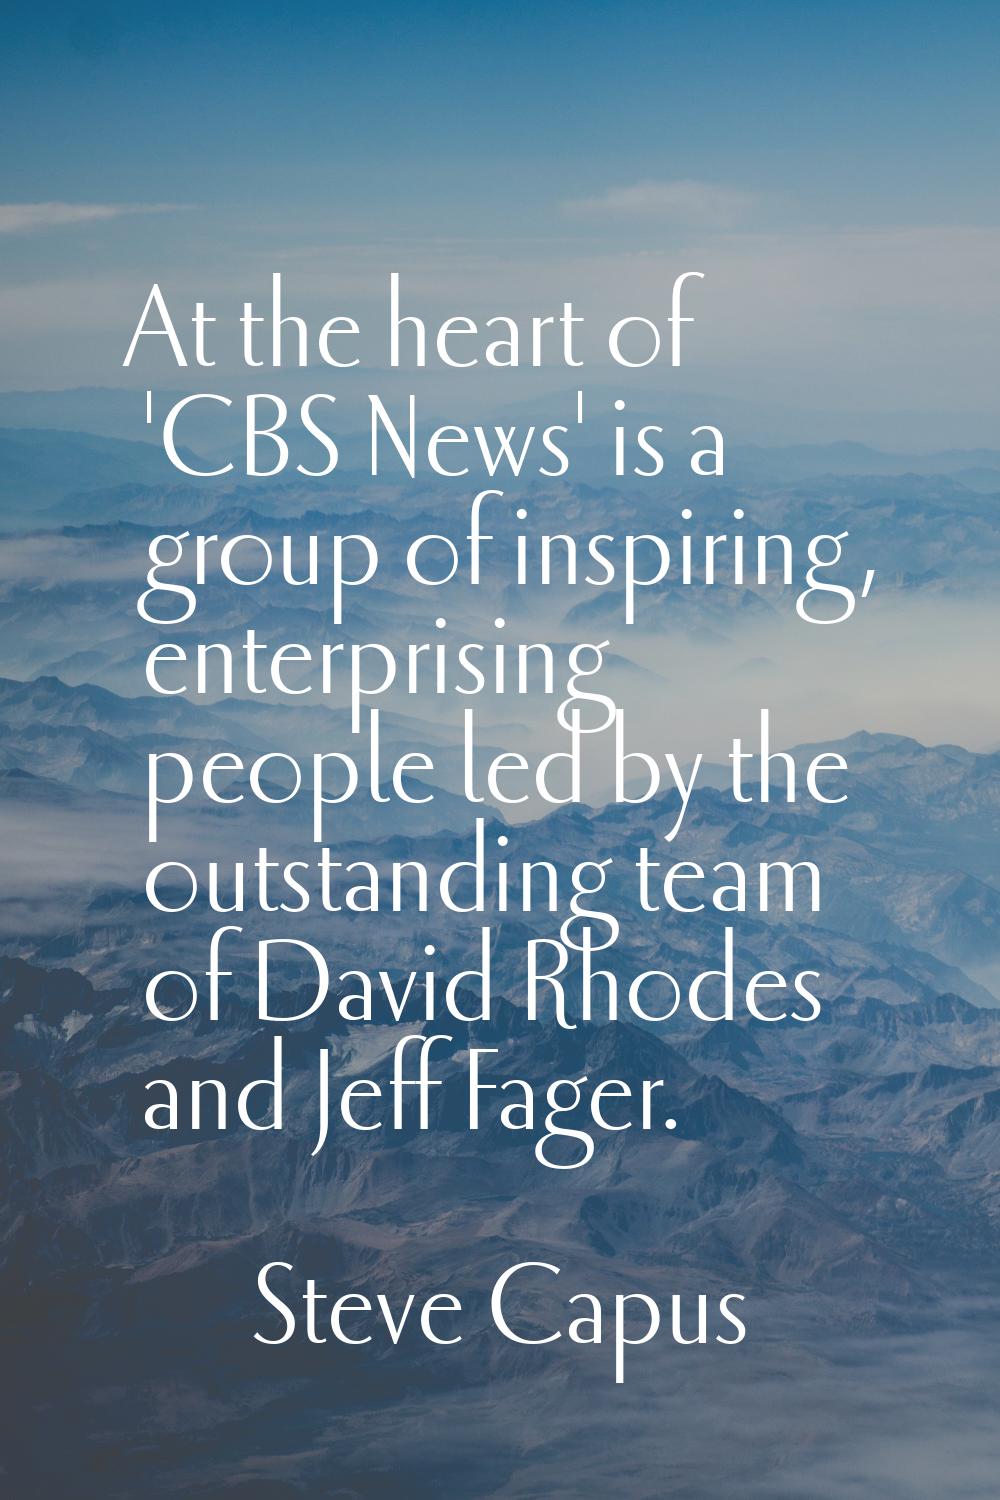 At the heart of 'CBS News' is a group of inspiring, enterprising people led by the outstanding team